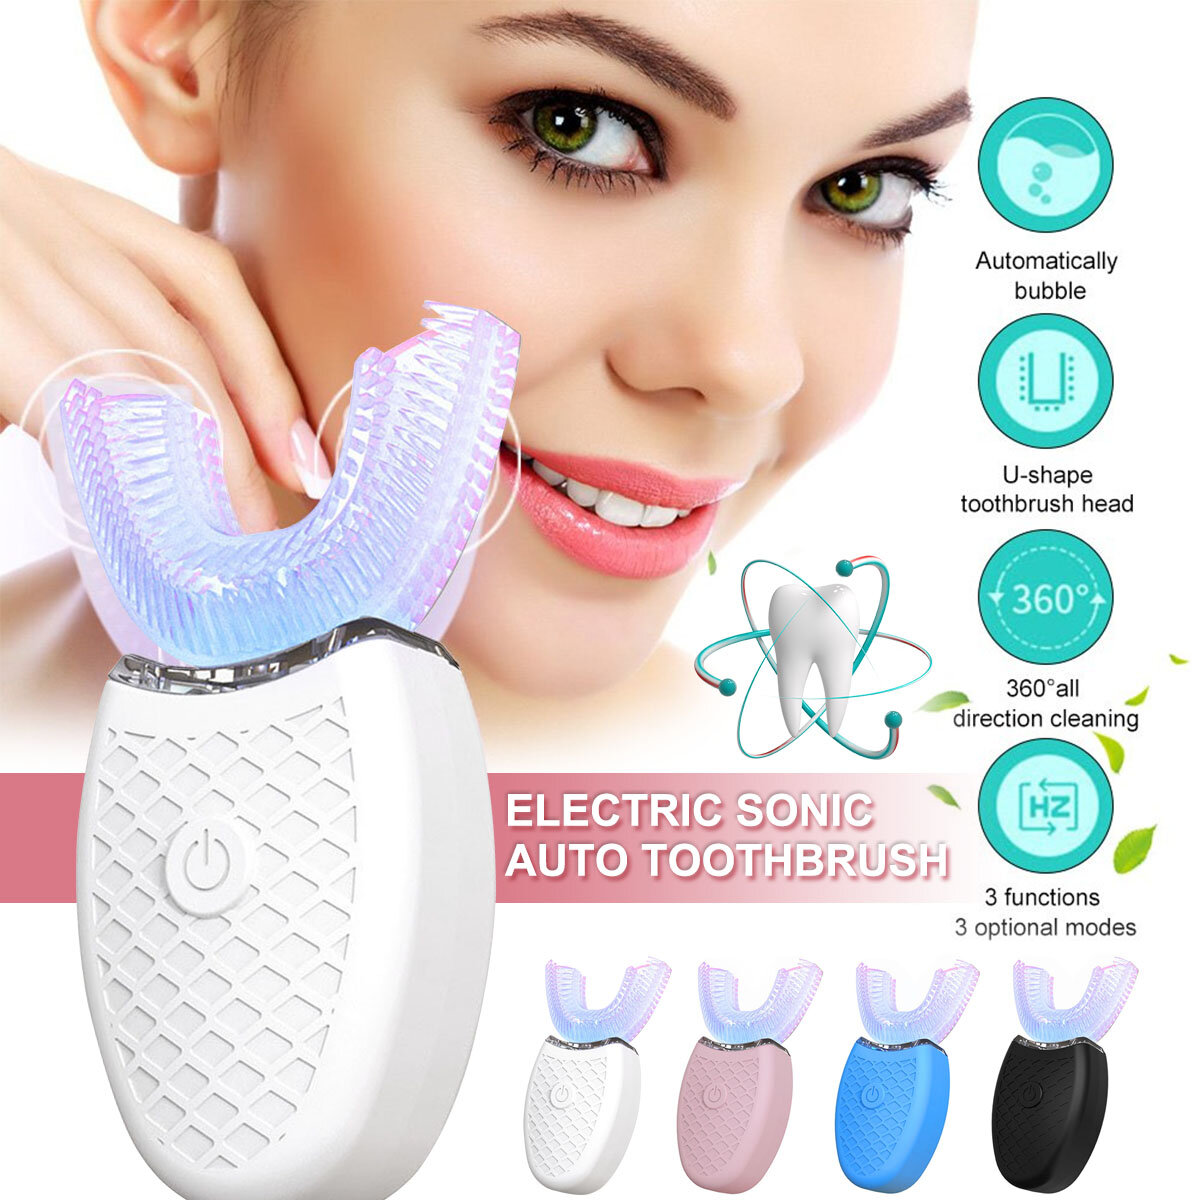 

Ultrasonic Fully Automatic 360° U-Shaped Electric Toothbrush LED Light Clean Teeth Whiten Oral Cleaning, #01